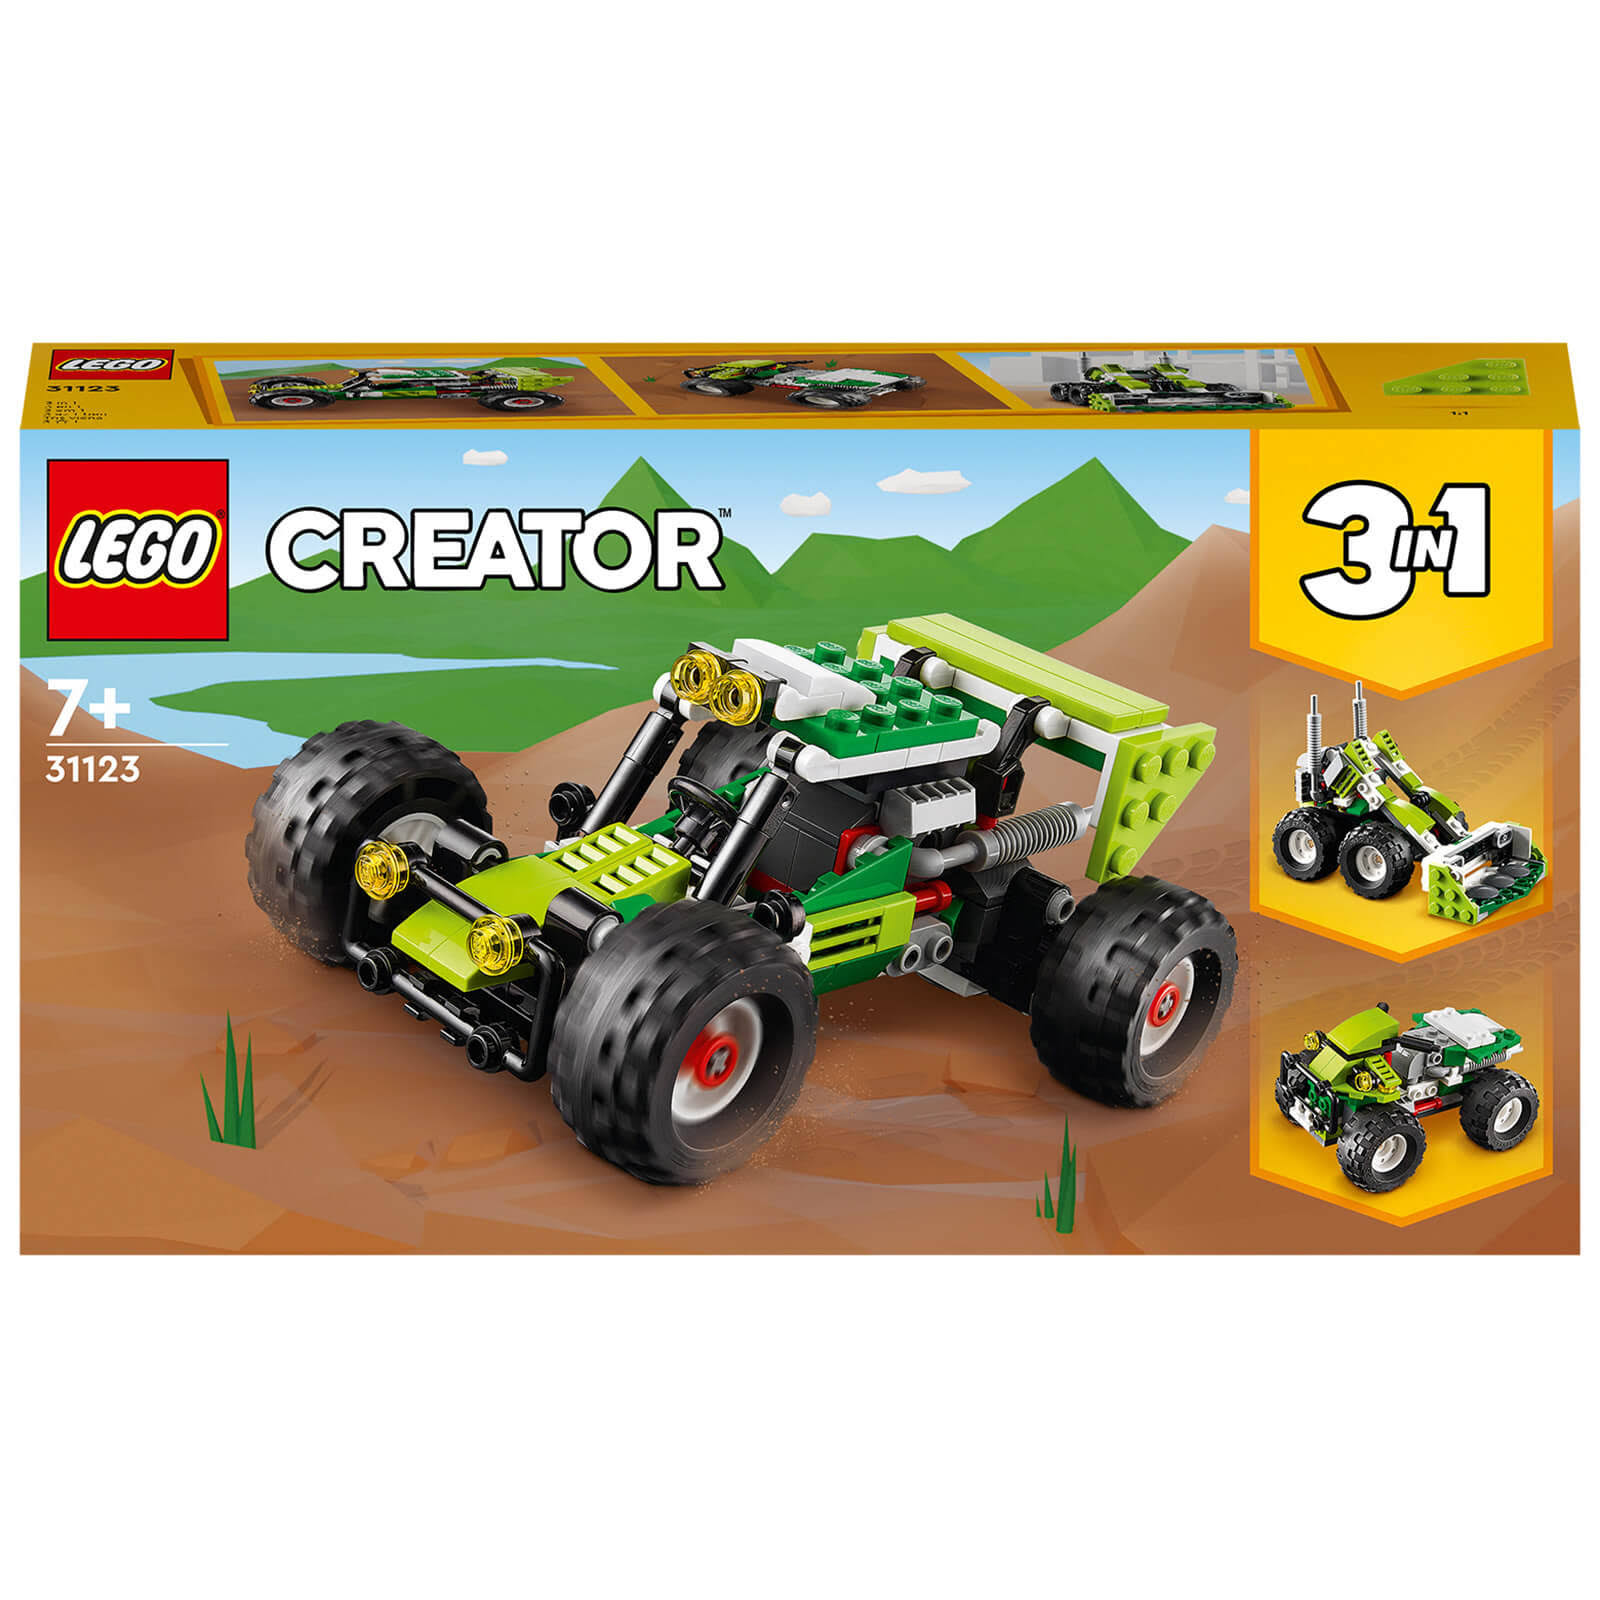 LEGO Creator: 3in1 Off-Road Buggy, Digger, Toy Car Set (31123)